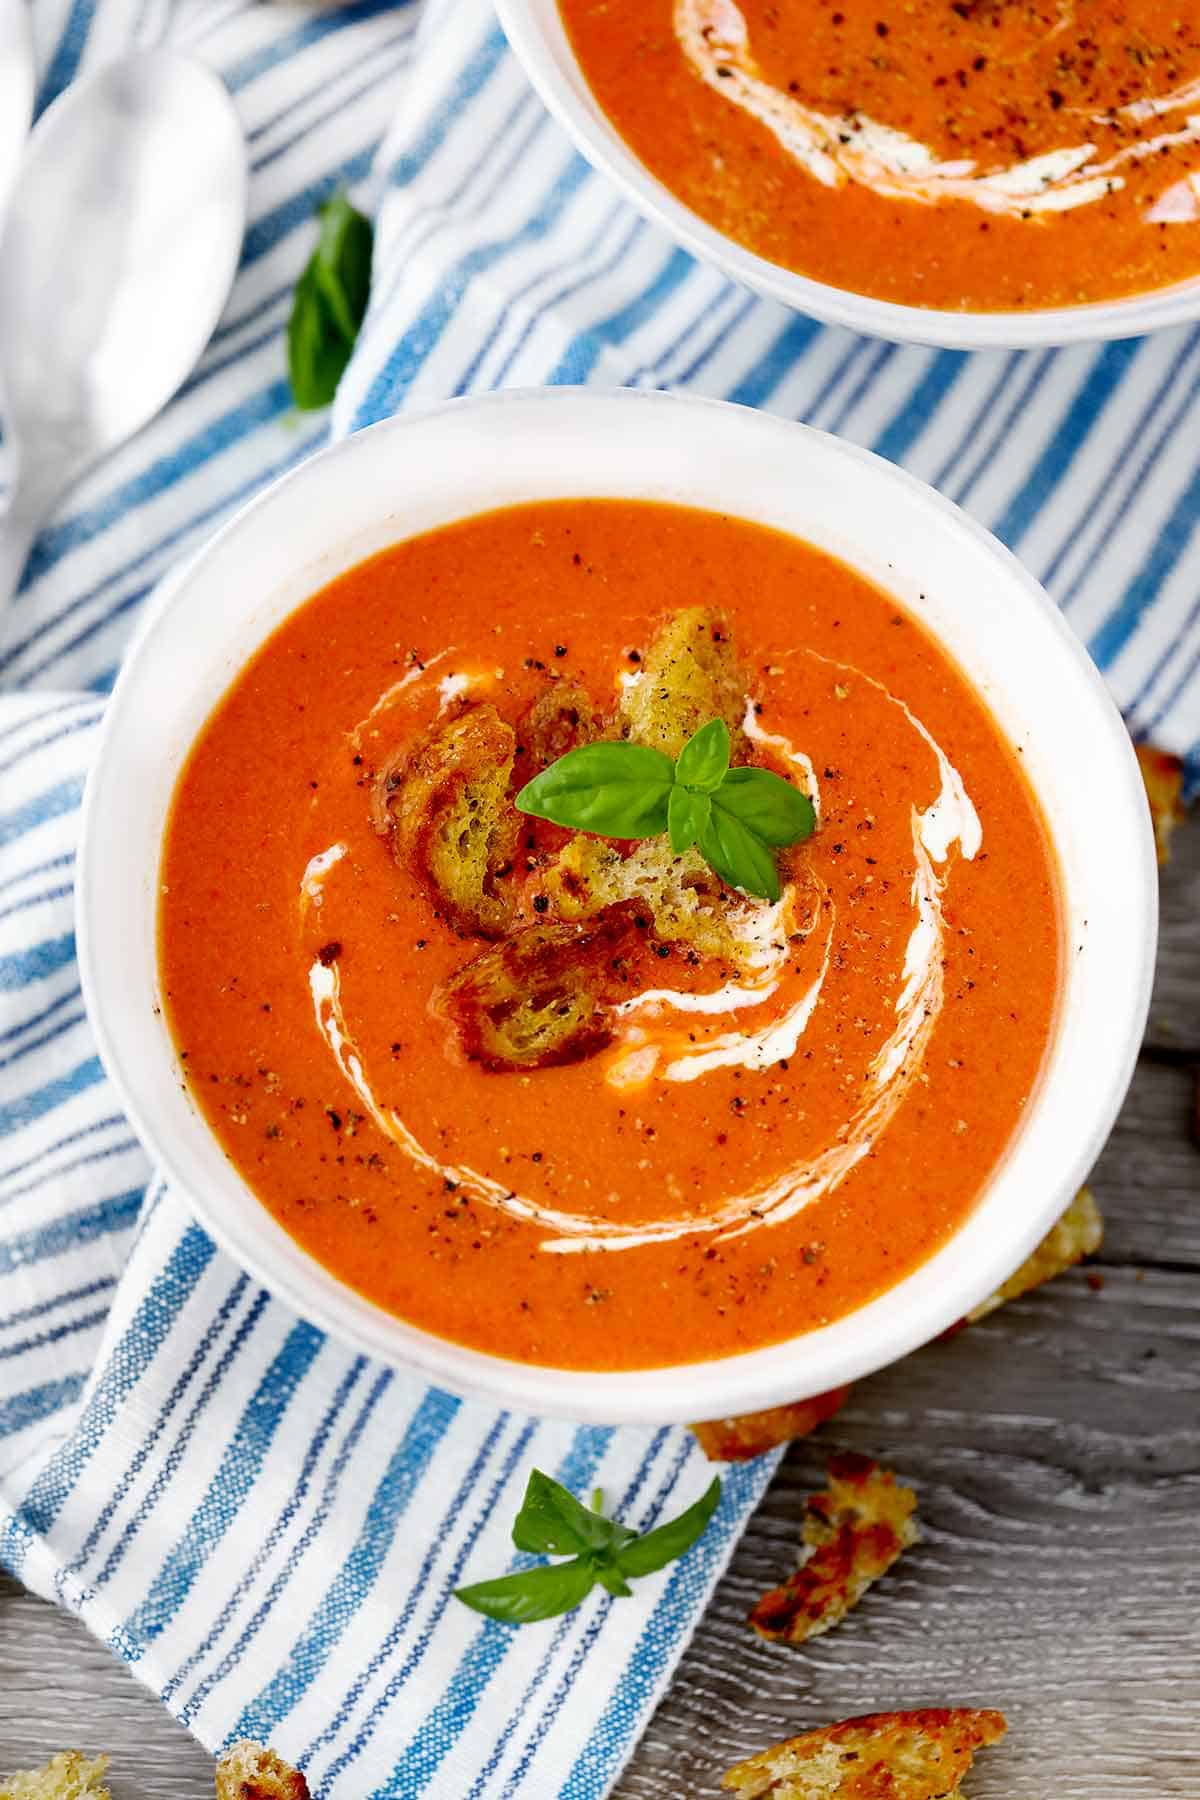 Close up photo of a bowl of roasted red pepper and tomato soup with basil leaves and croutons on top.